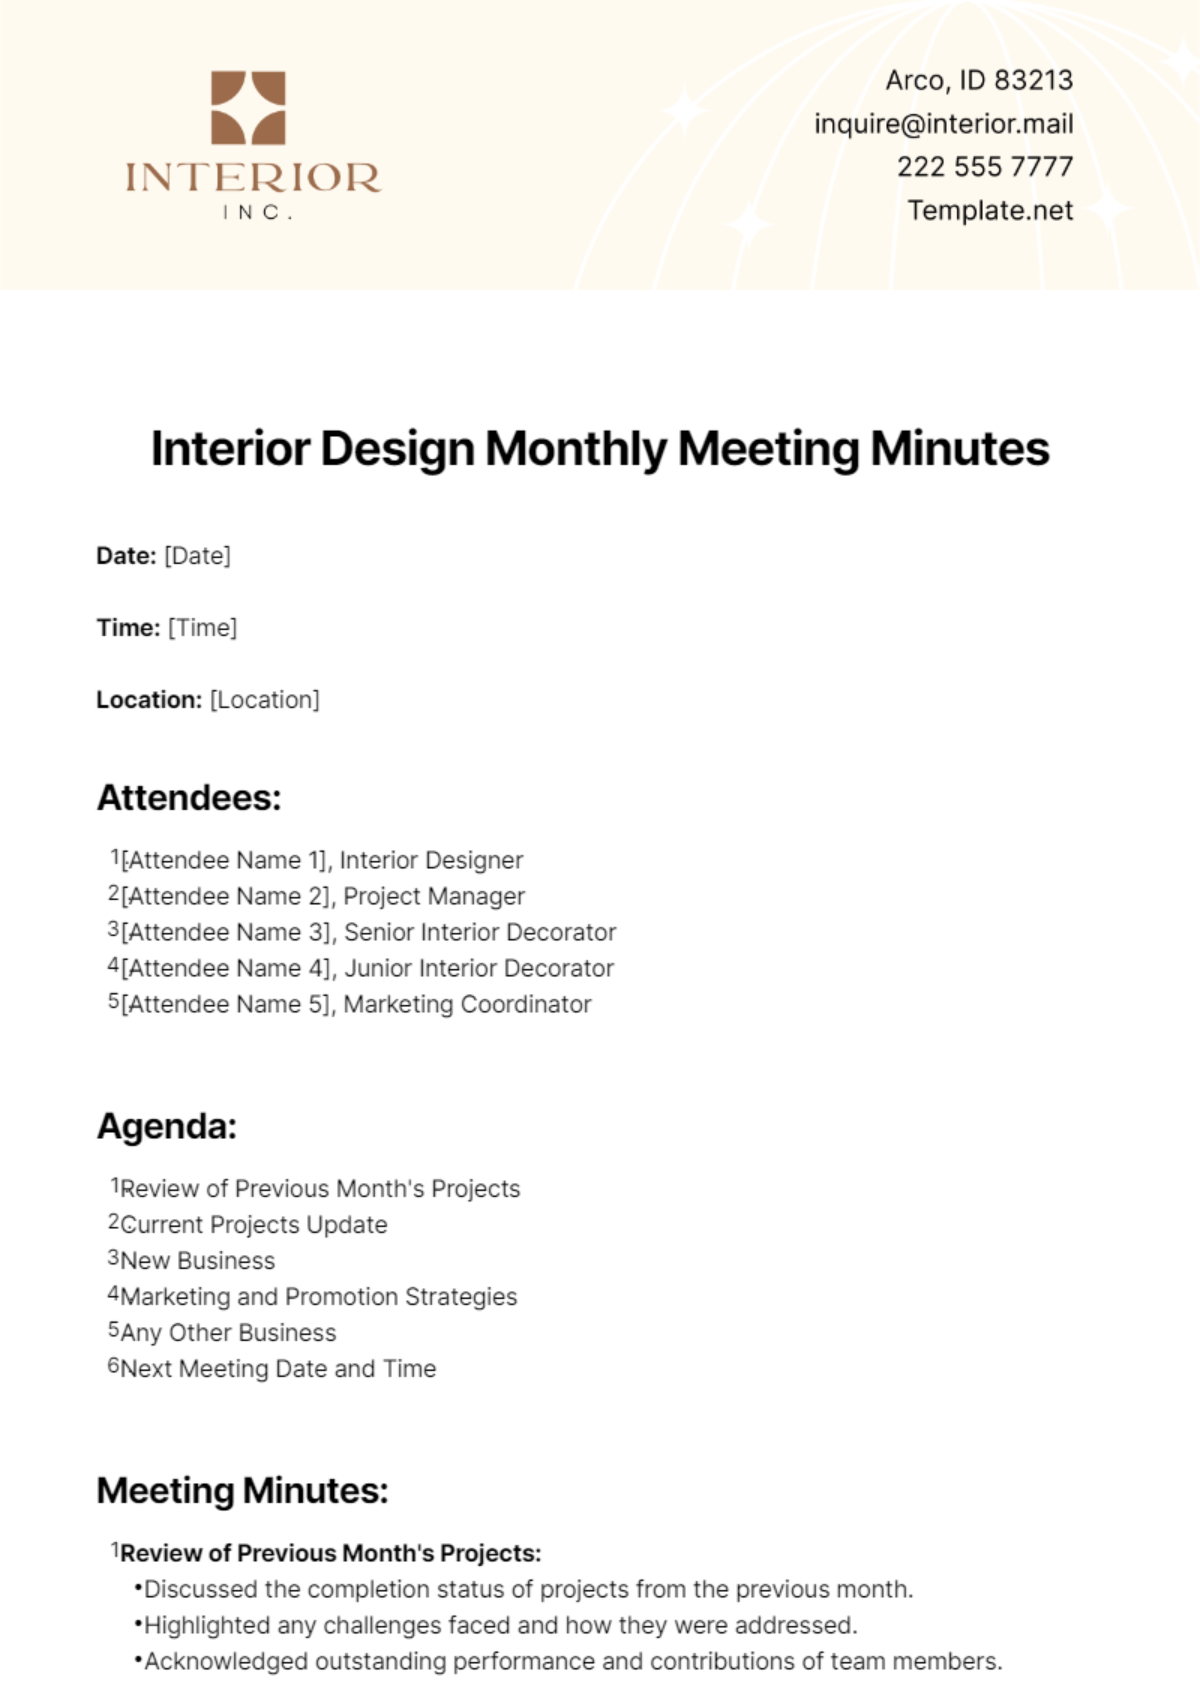 Free Interior Design Monthly Meeting Minutes Template